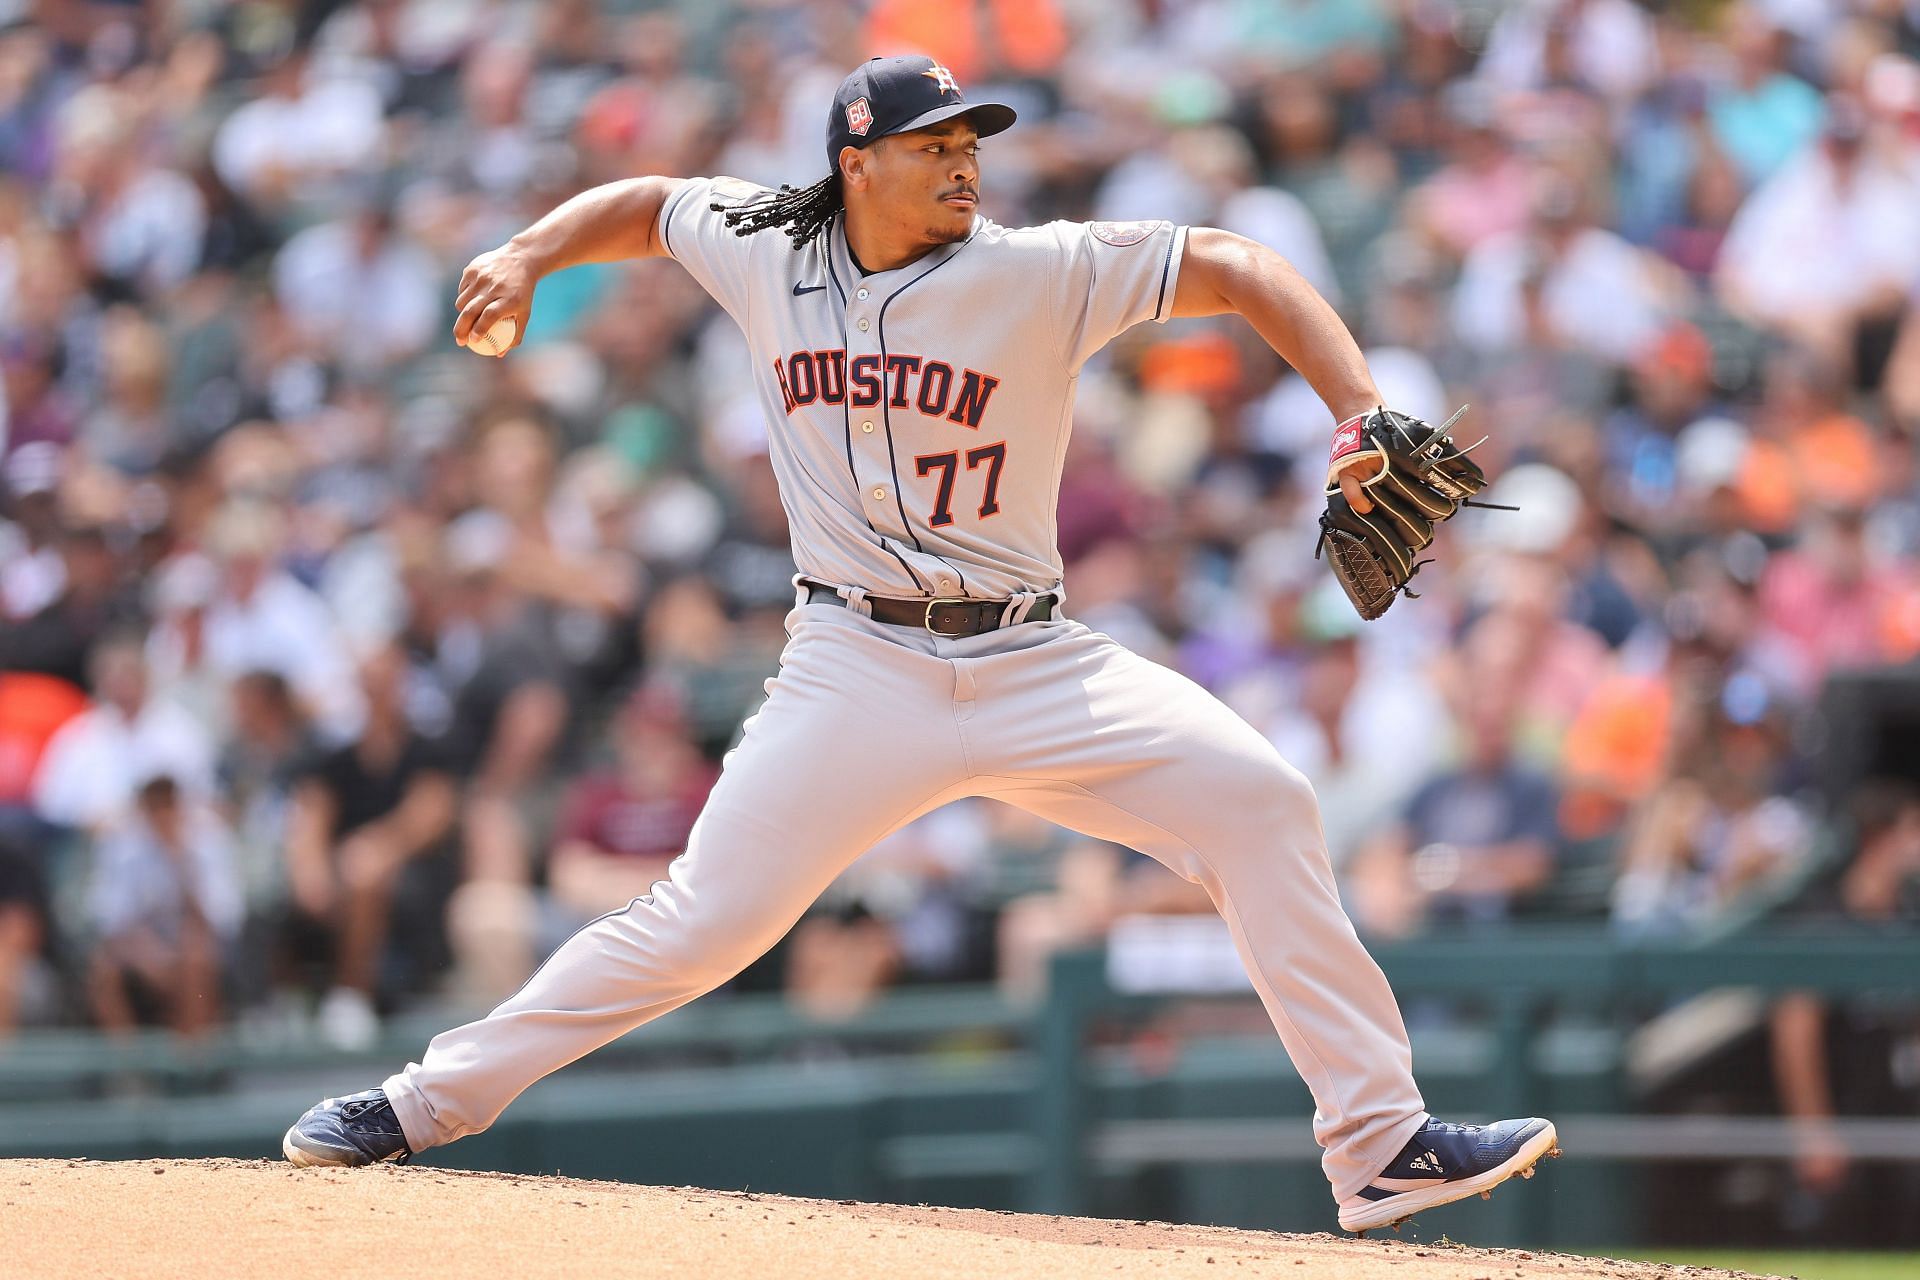 Astros pitcher Luis Garcia's rock the baby windup now banned under new MLB  rules